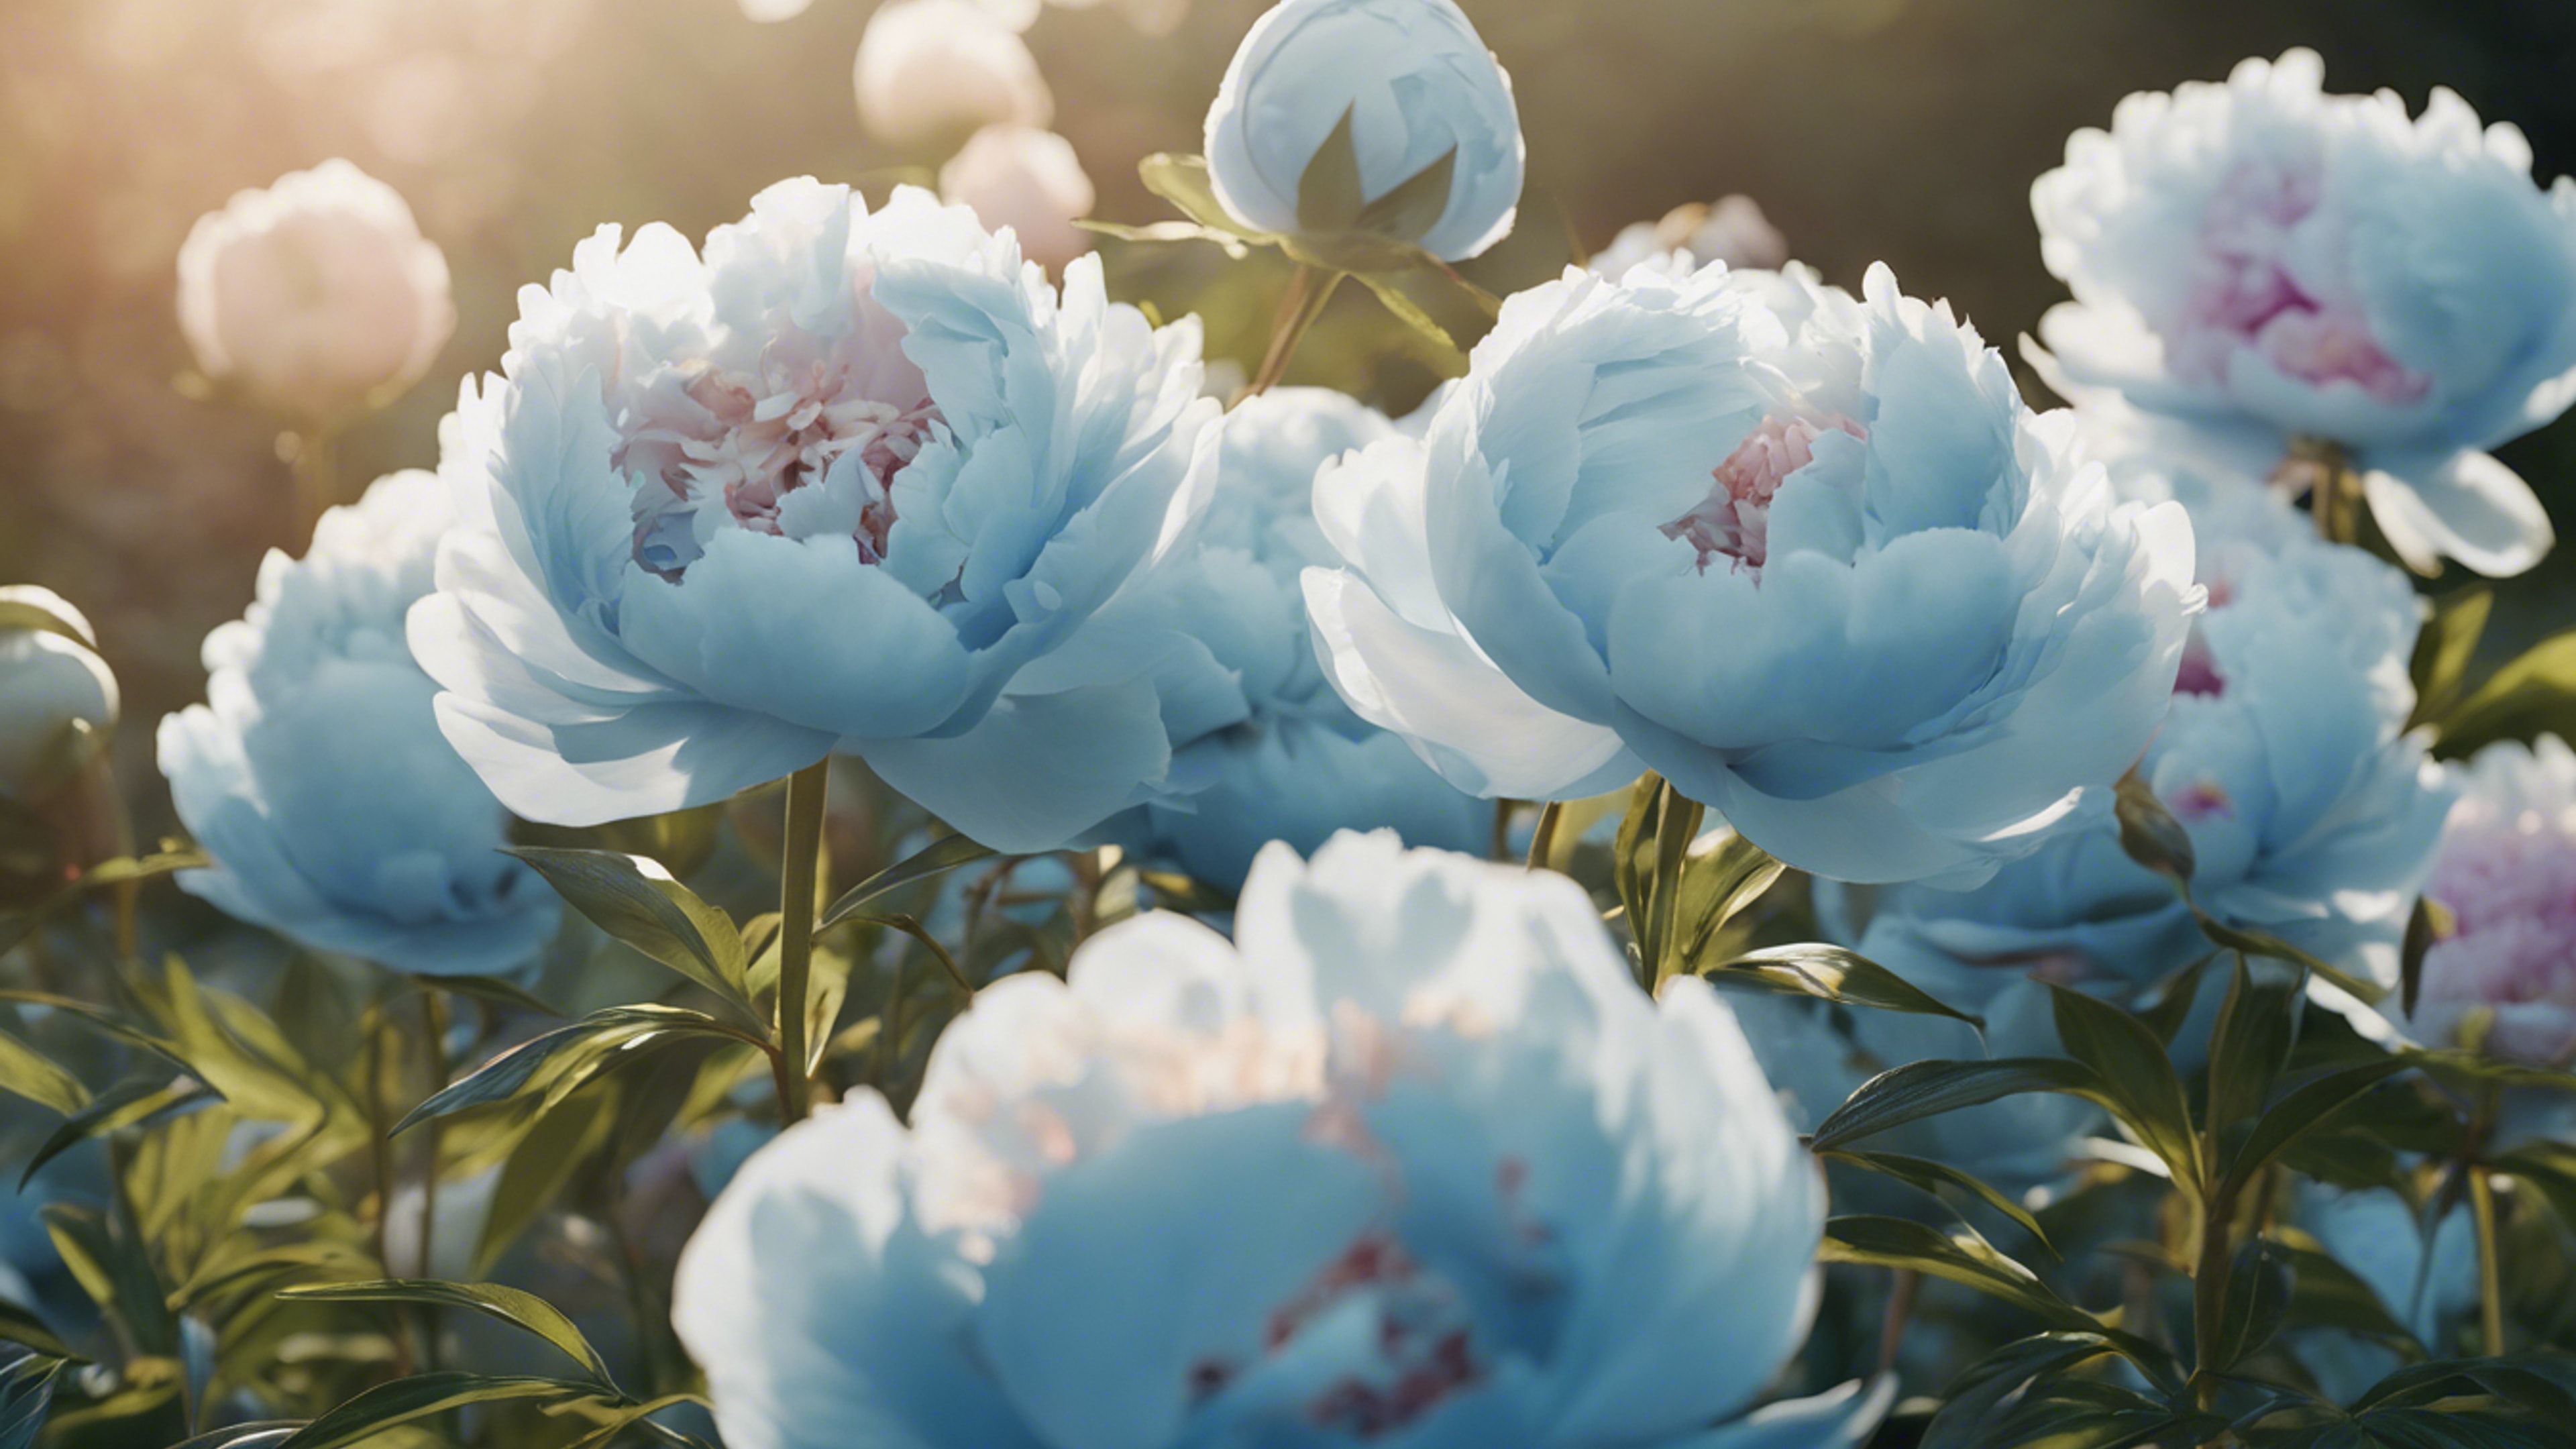 An array of pastel blue peonies blooming in a sunlit garden. Tapeet[bebed2869b0c4244859a]